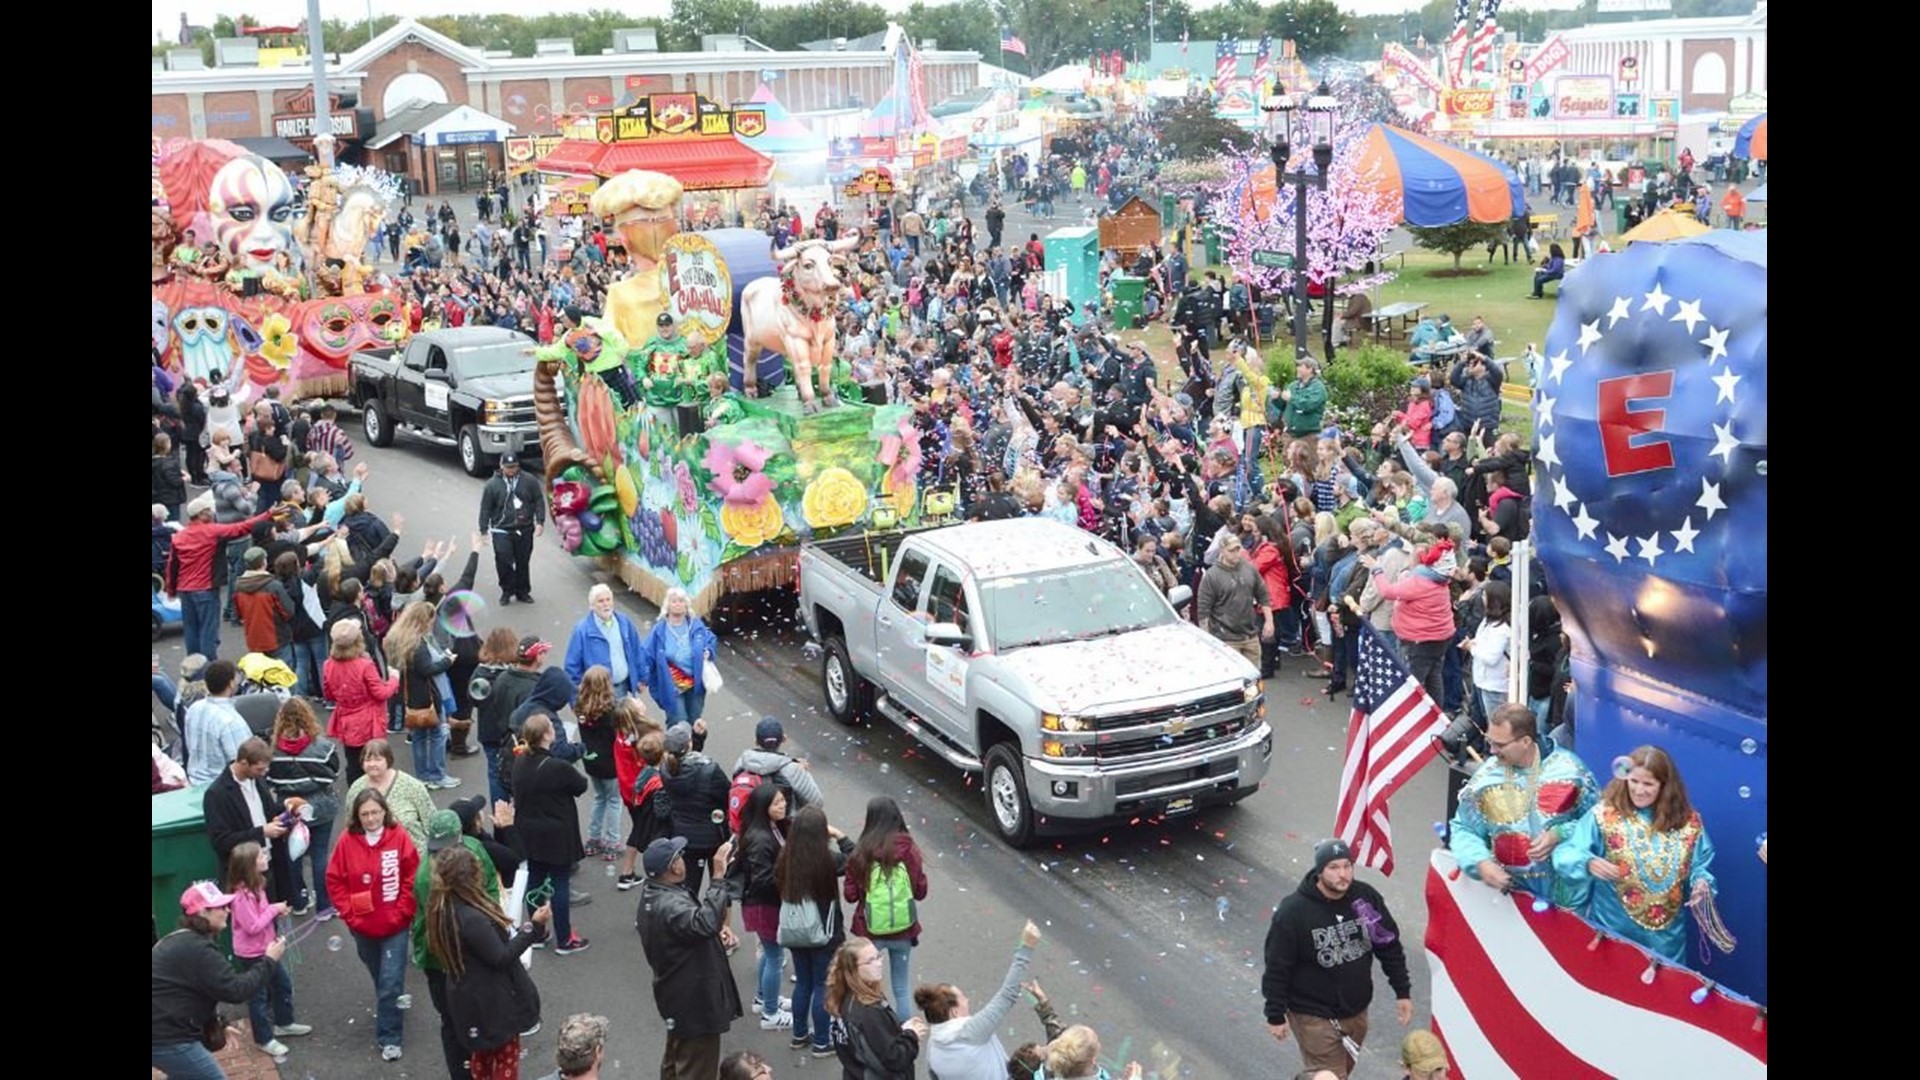 The Big E sets attendance records with 1.4 million attendees